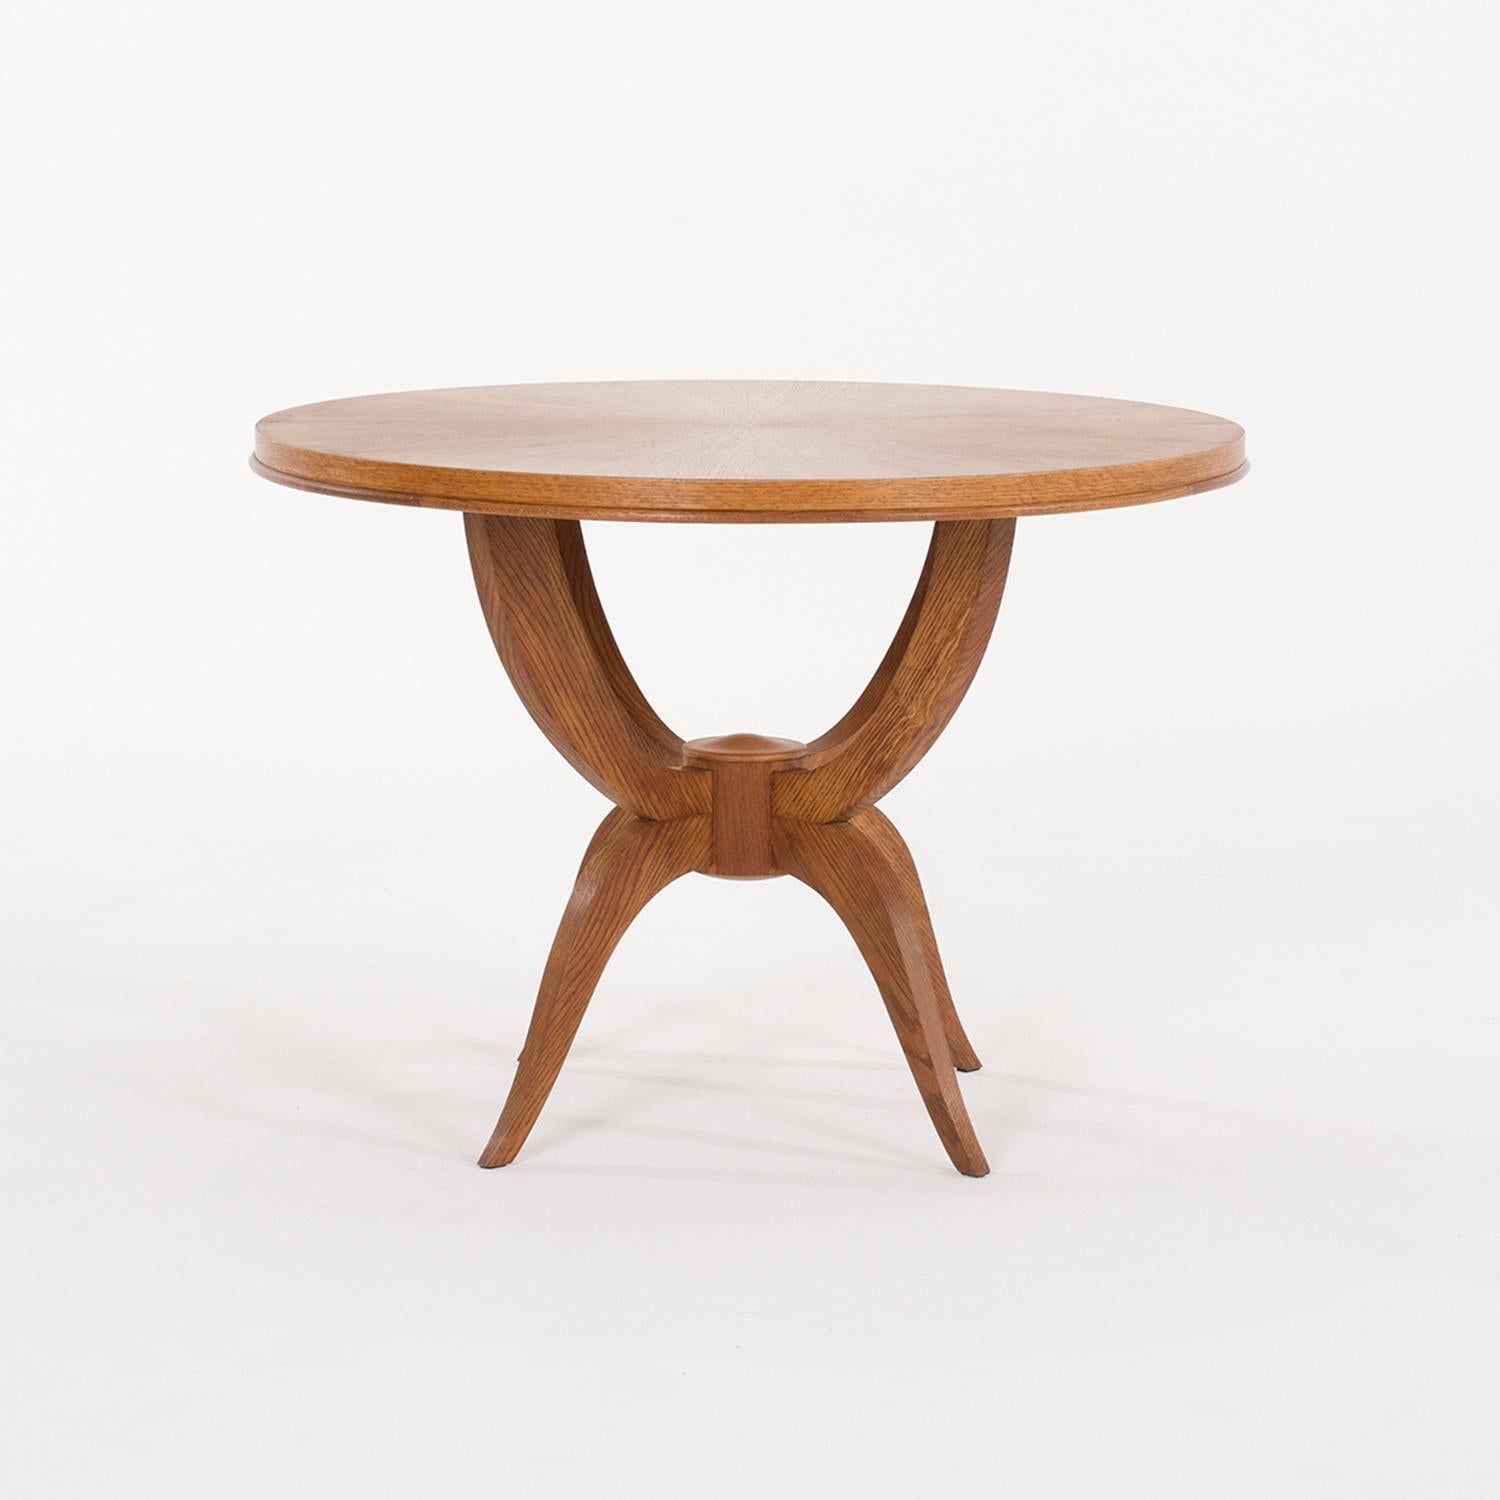 20th Century Danish Round Mid-Century Modern Vintage Oakwood Sofa Table In Good Condition For Sale In West Palm Beach, FL